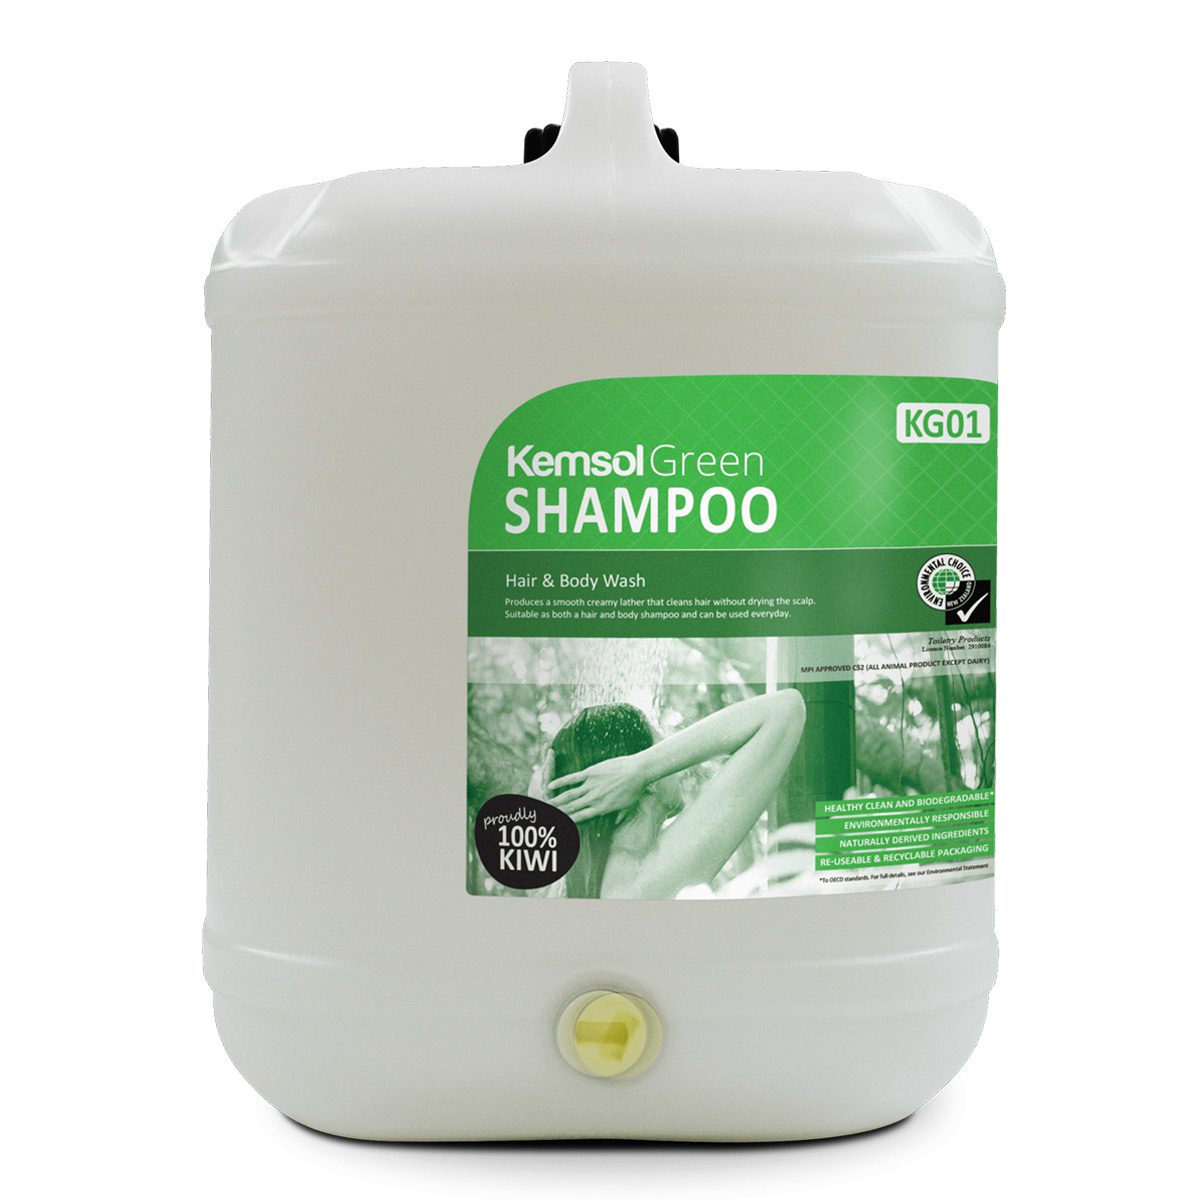 cleaning-products-environmental-kemsol-green-shampoo-20L-litre-soft-on-hair-gentle-on-skin-smooth-creamy-lather-cleans-without-drying-scalp-leaves-soft-floral-fragrance-vjs-distributors-KSHAMP20